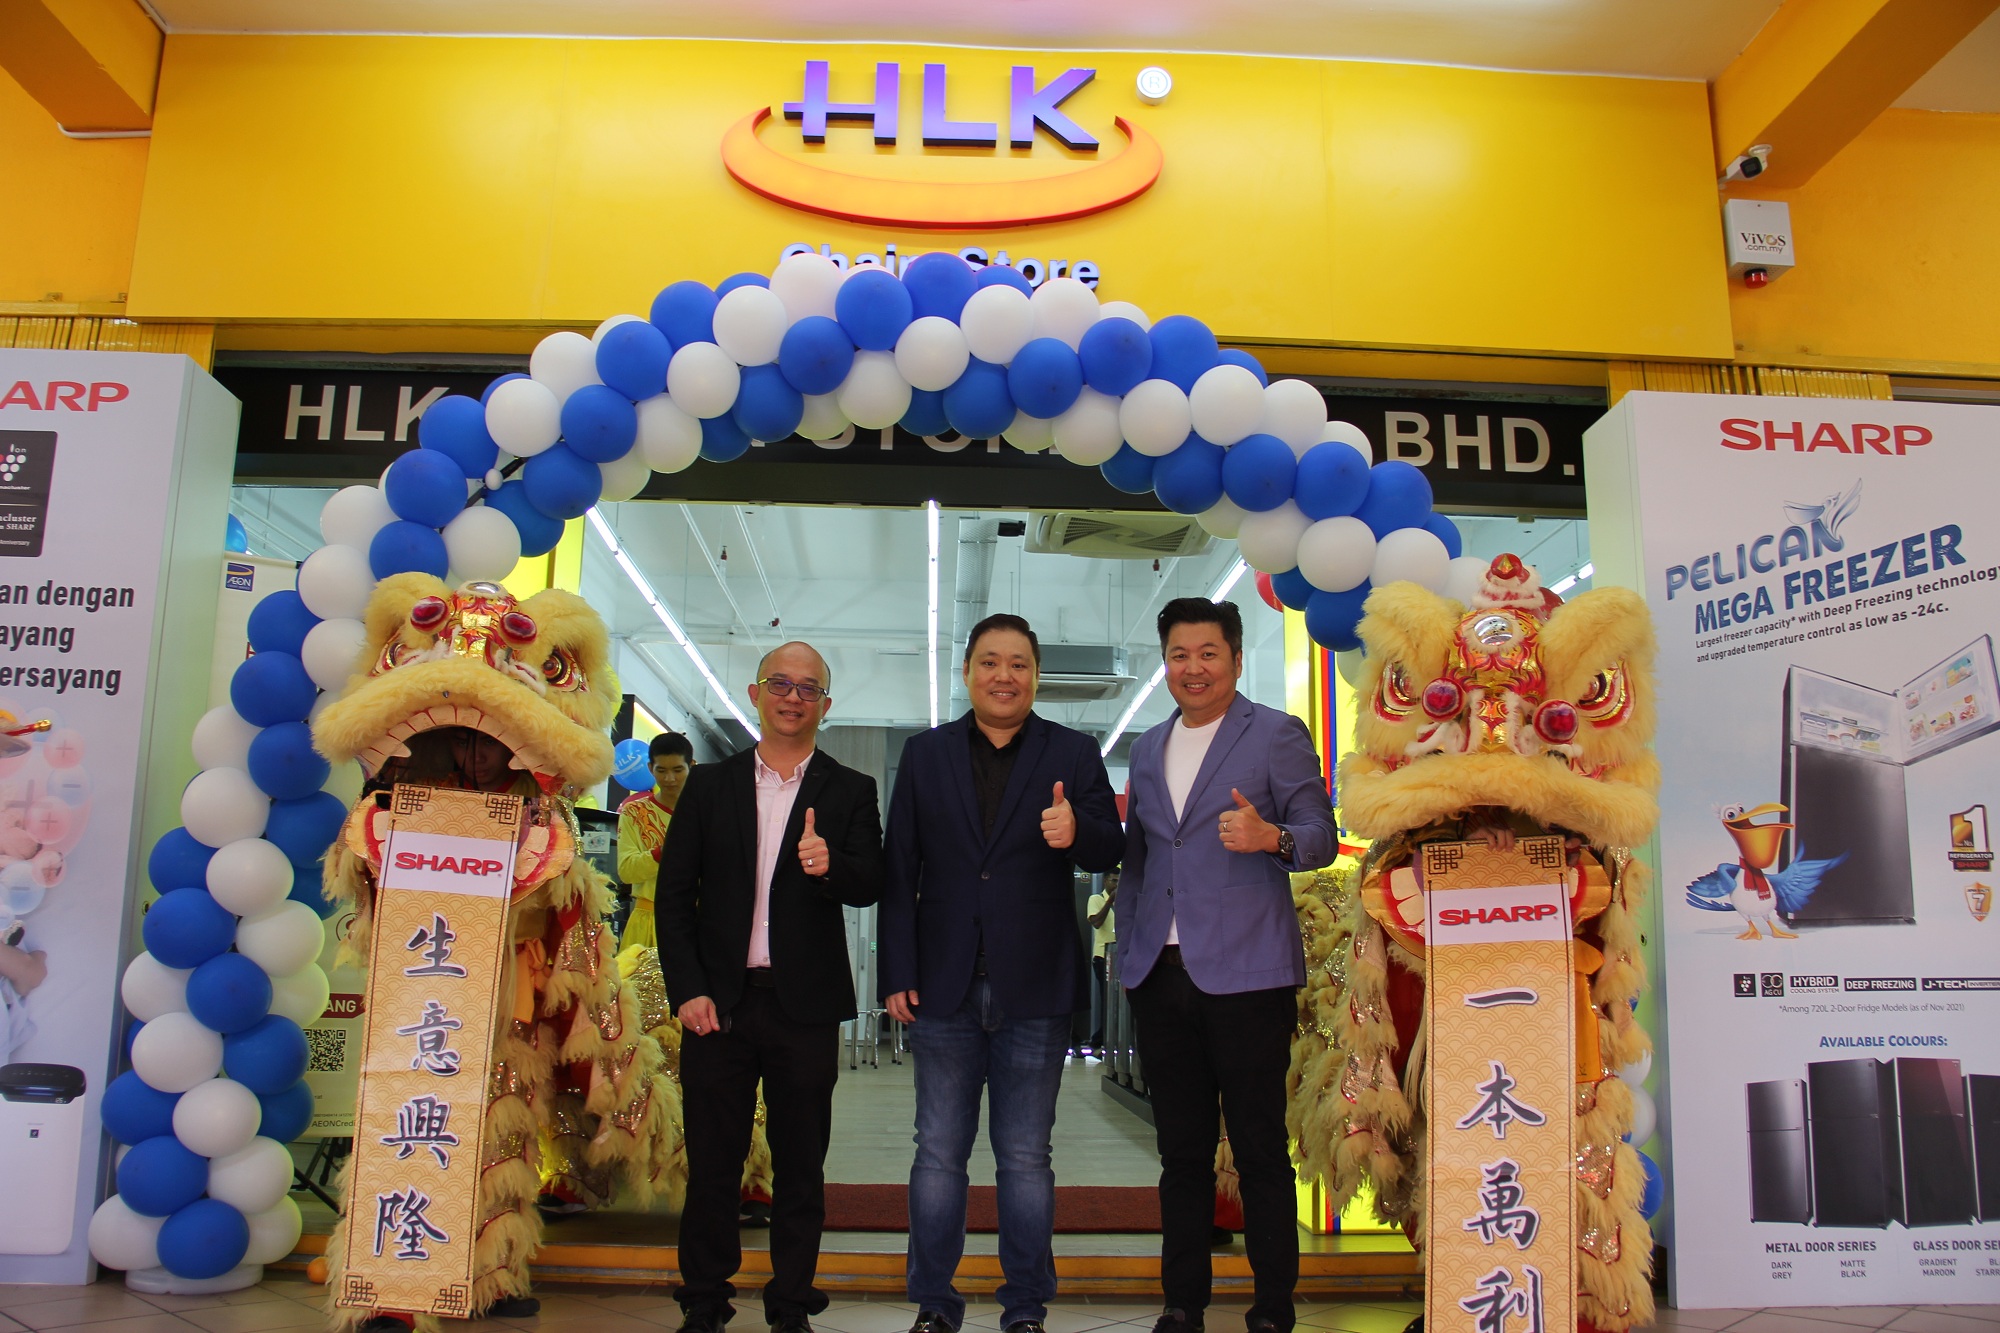 Group Managing Director Dato' Lim Kee Leong (middle), Executive Director Lim Kee Wei (right) and General Manager of the electrical appliance brand Sharp Wang Defu presided over the opening ribbon cutting.